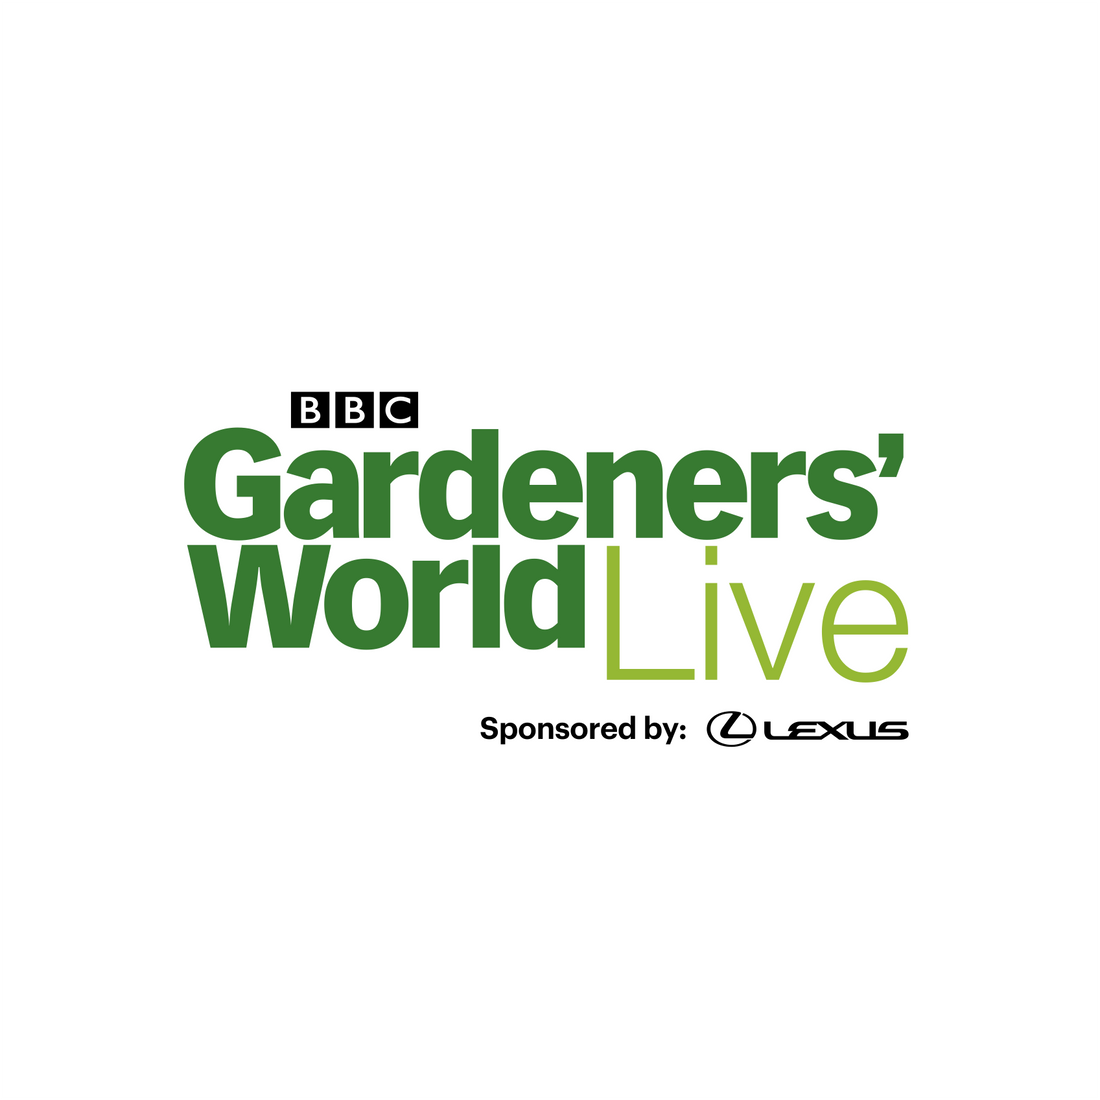 Using SketchUp to express yourself at this year's BBC Gardener's World Live 2022